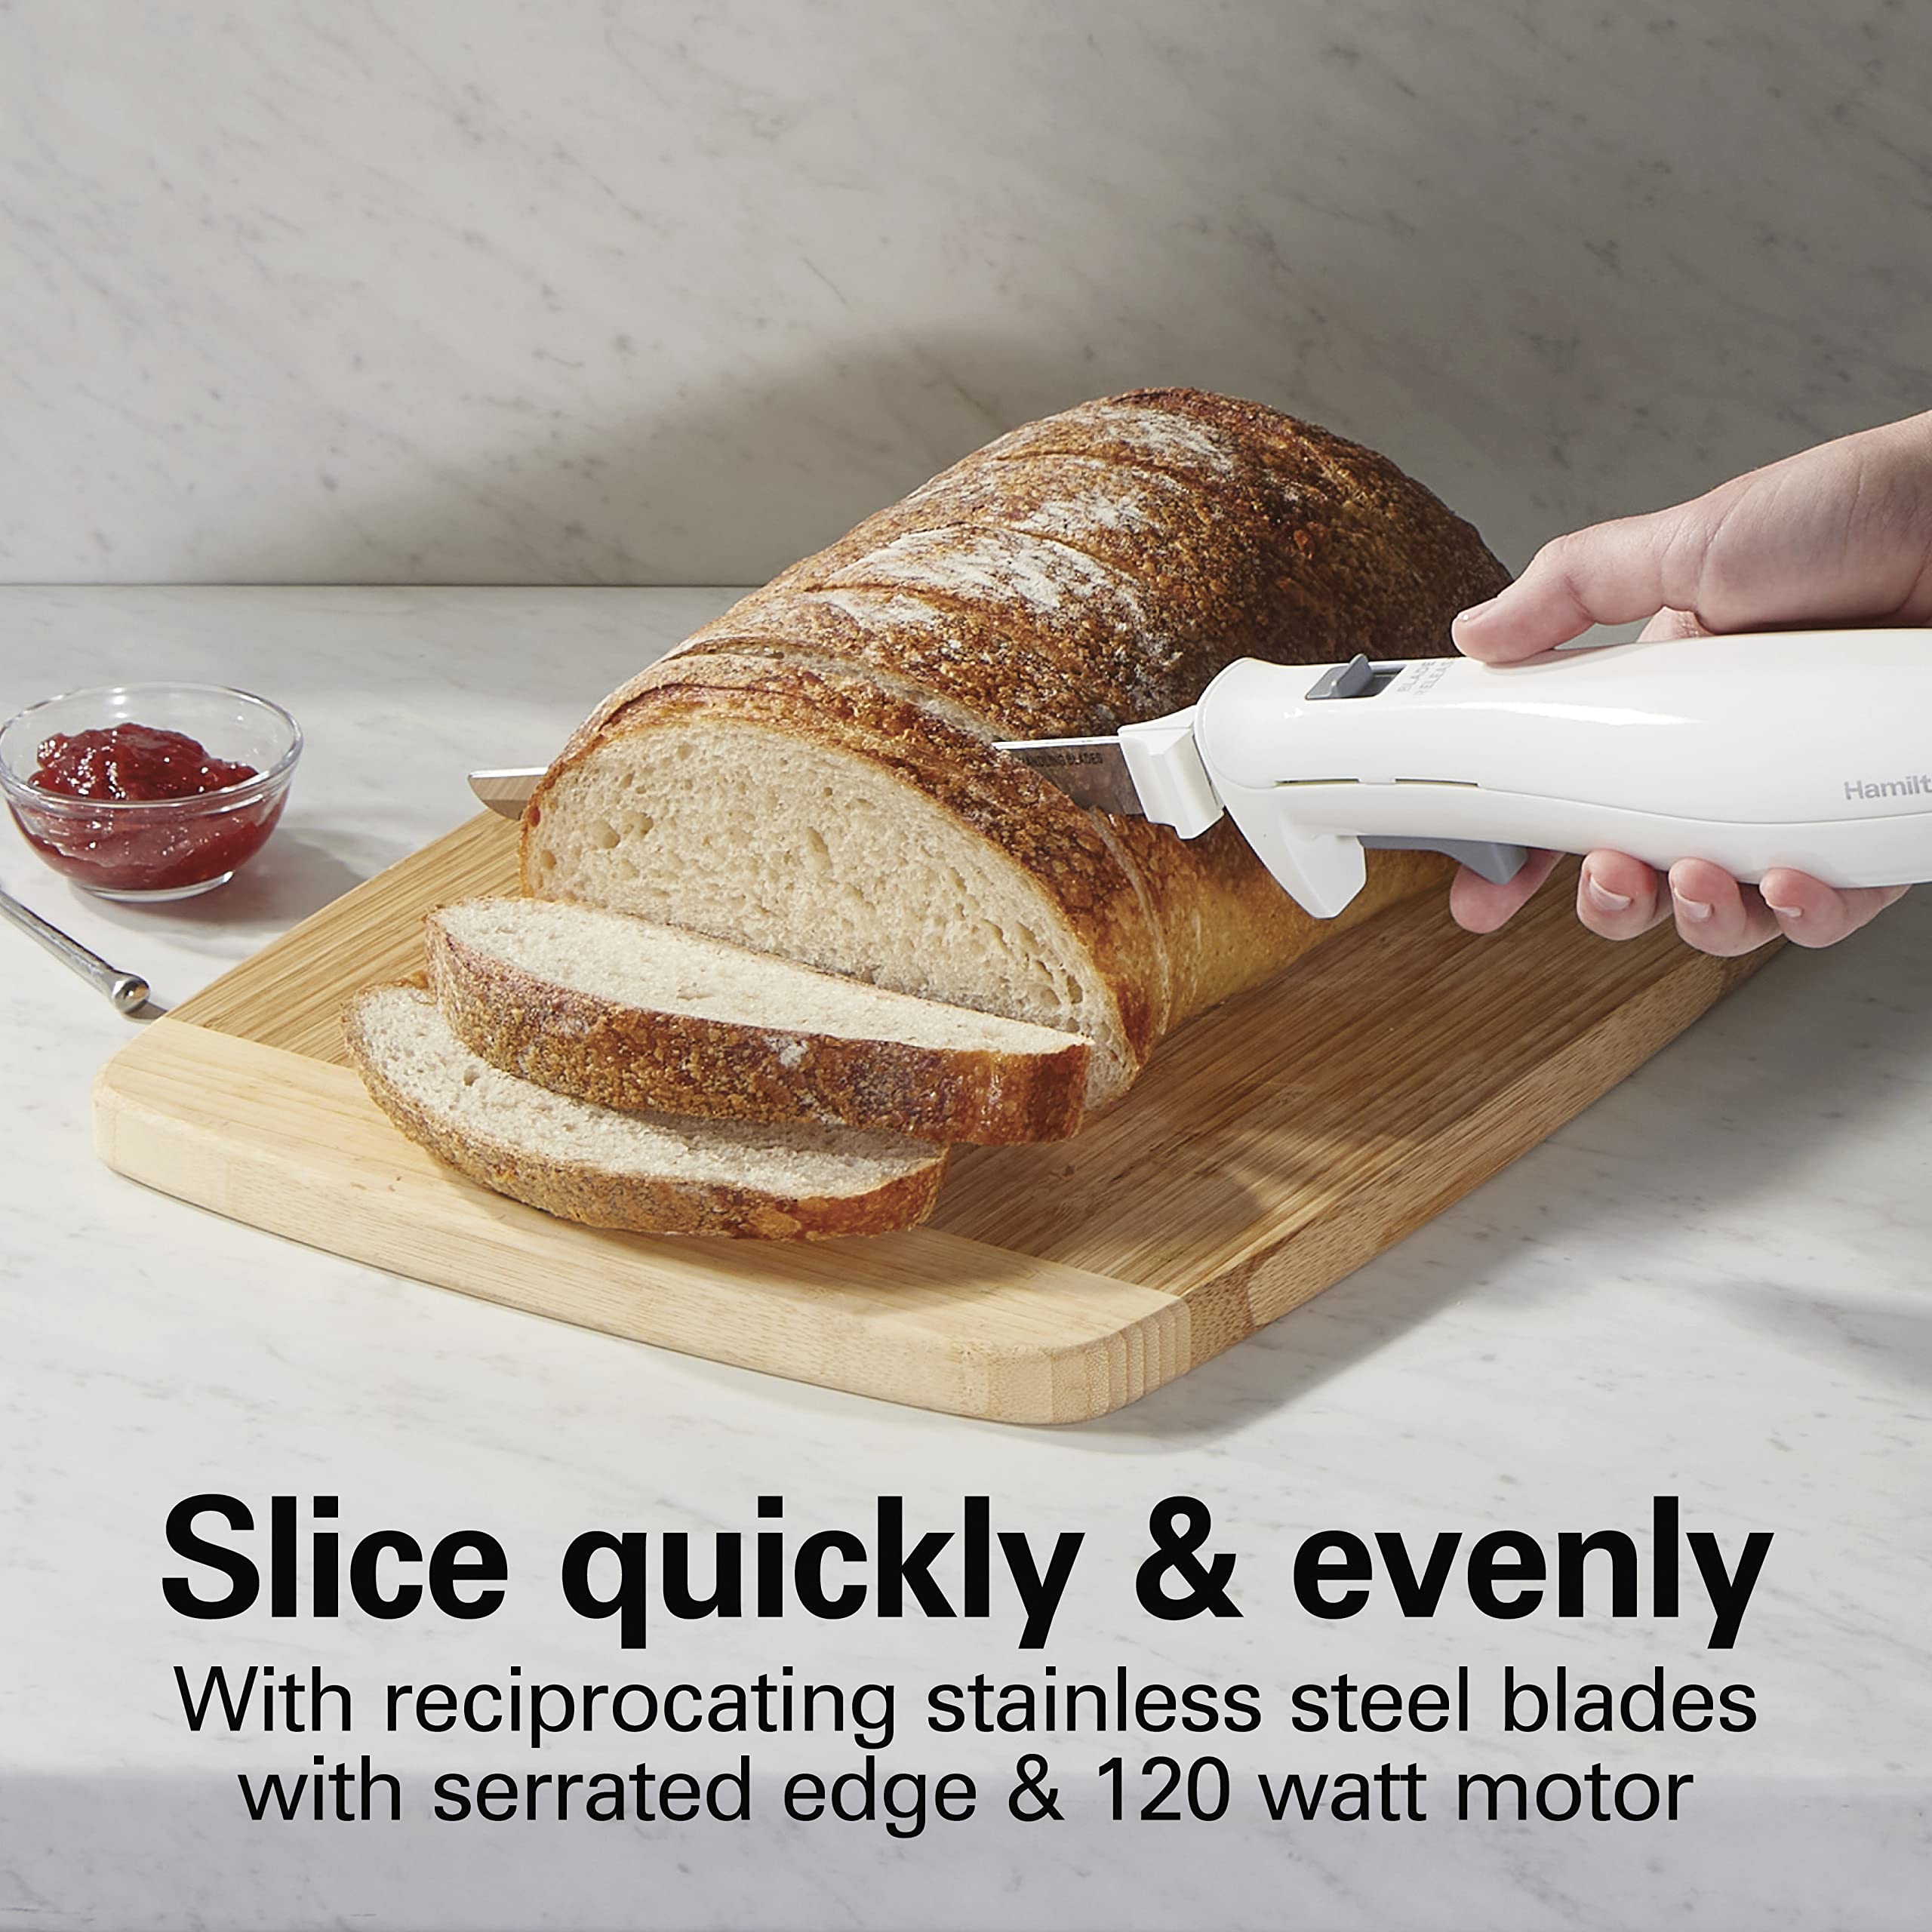 Hamilton Beach Electric Knife for Carving Meats, Poultry, Bread, Crafting Foam & More, Reciprocating Serrated Stainless Steel Blades, Ergonomic Design Storage Case + Fork Included, 5 Foot Cord, White